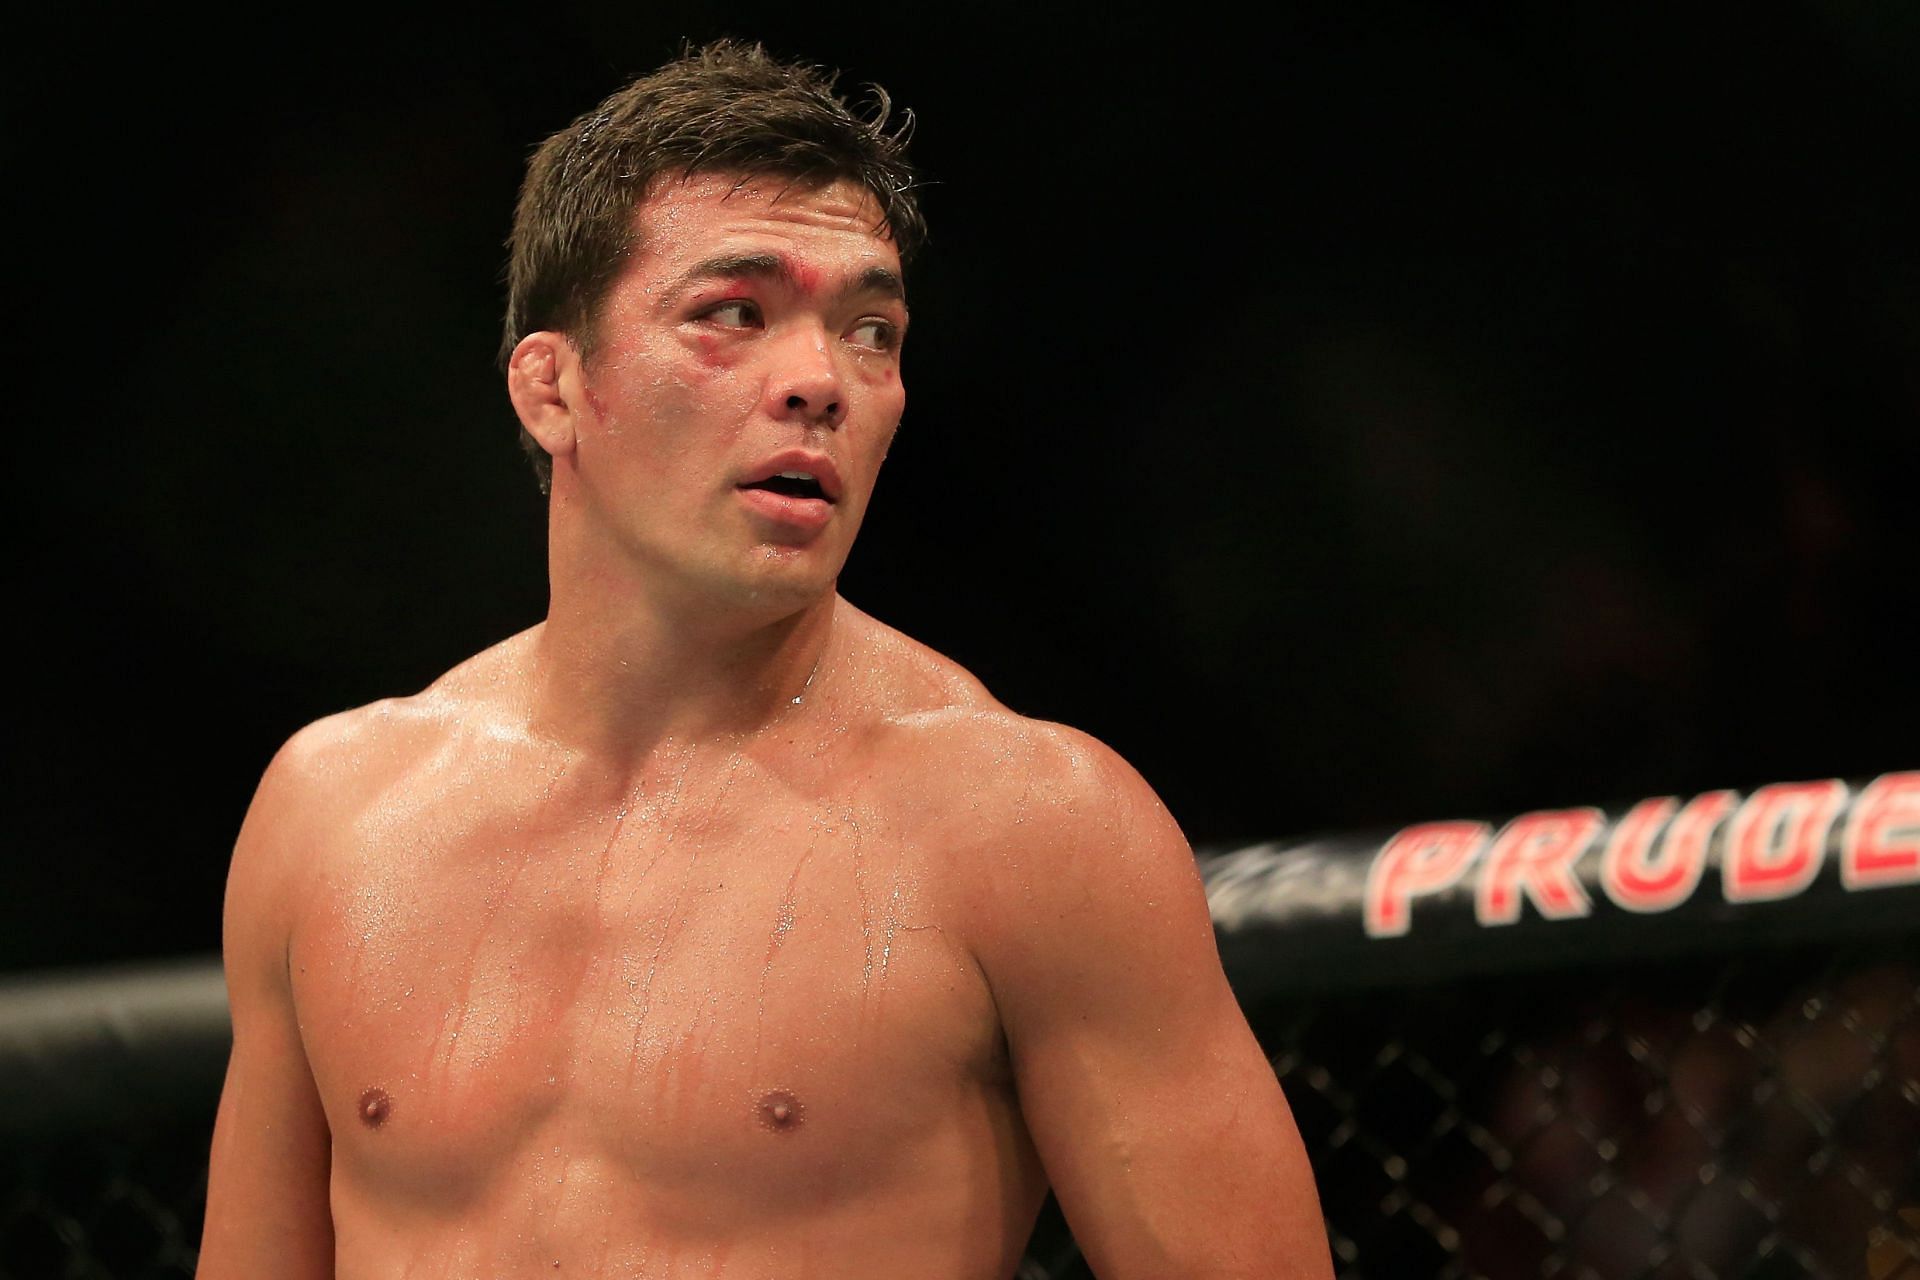 Lyoto Machida unleashed his inner Karate Kid to dispatch Randy Couture